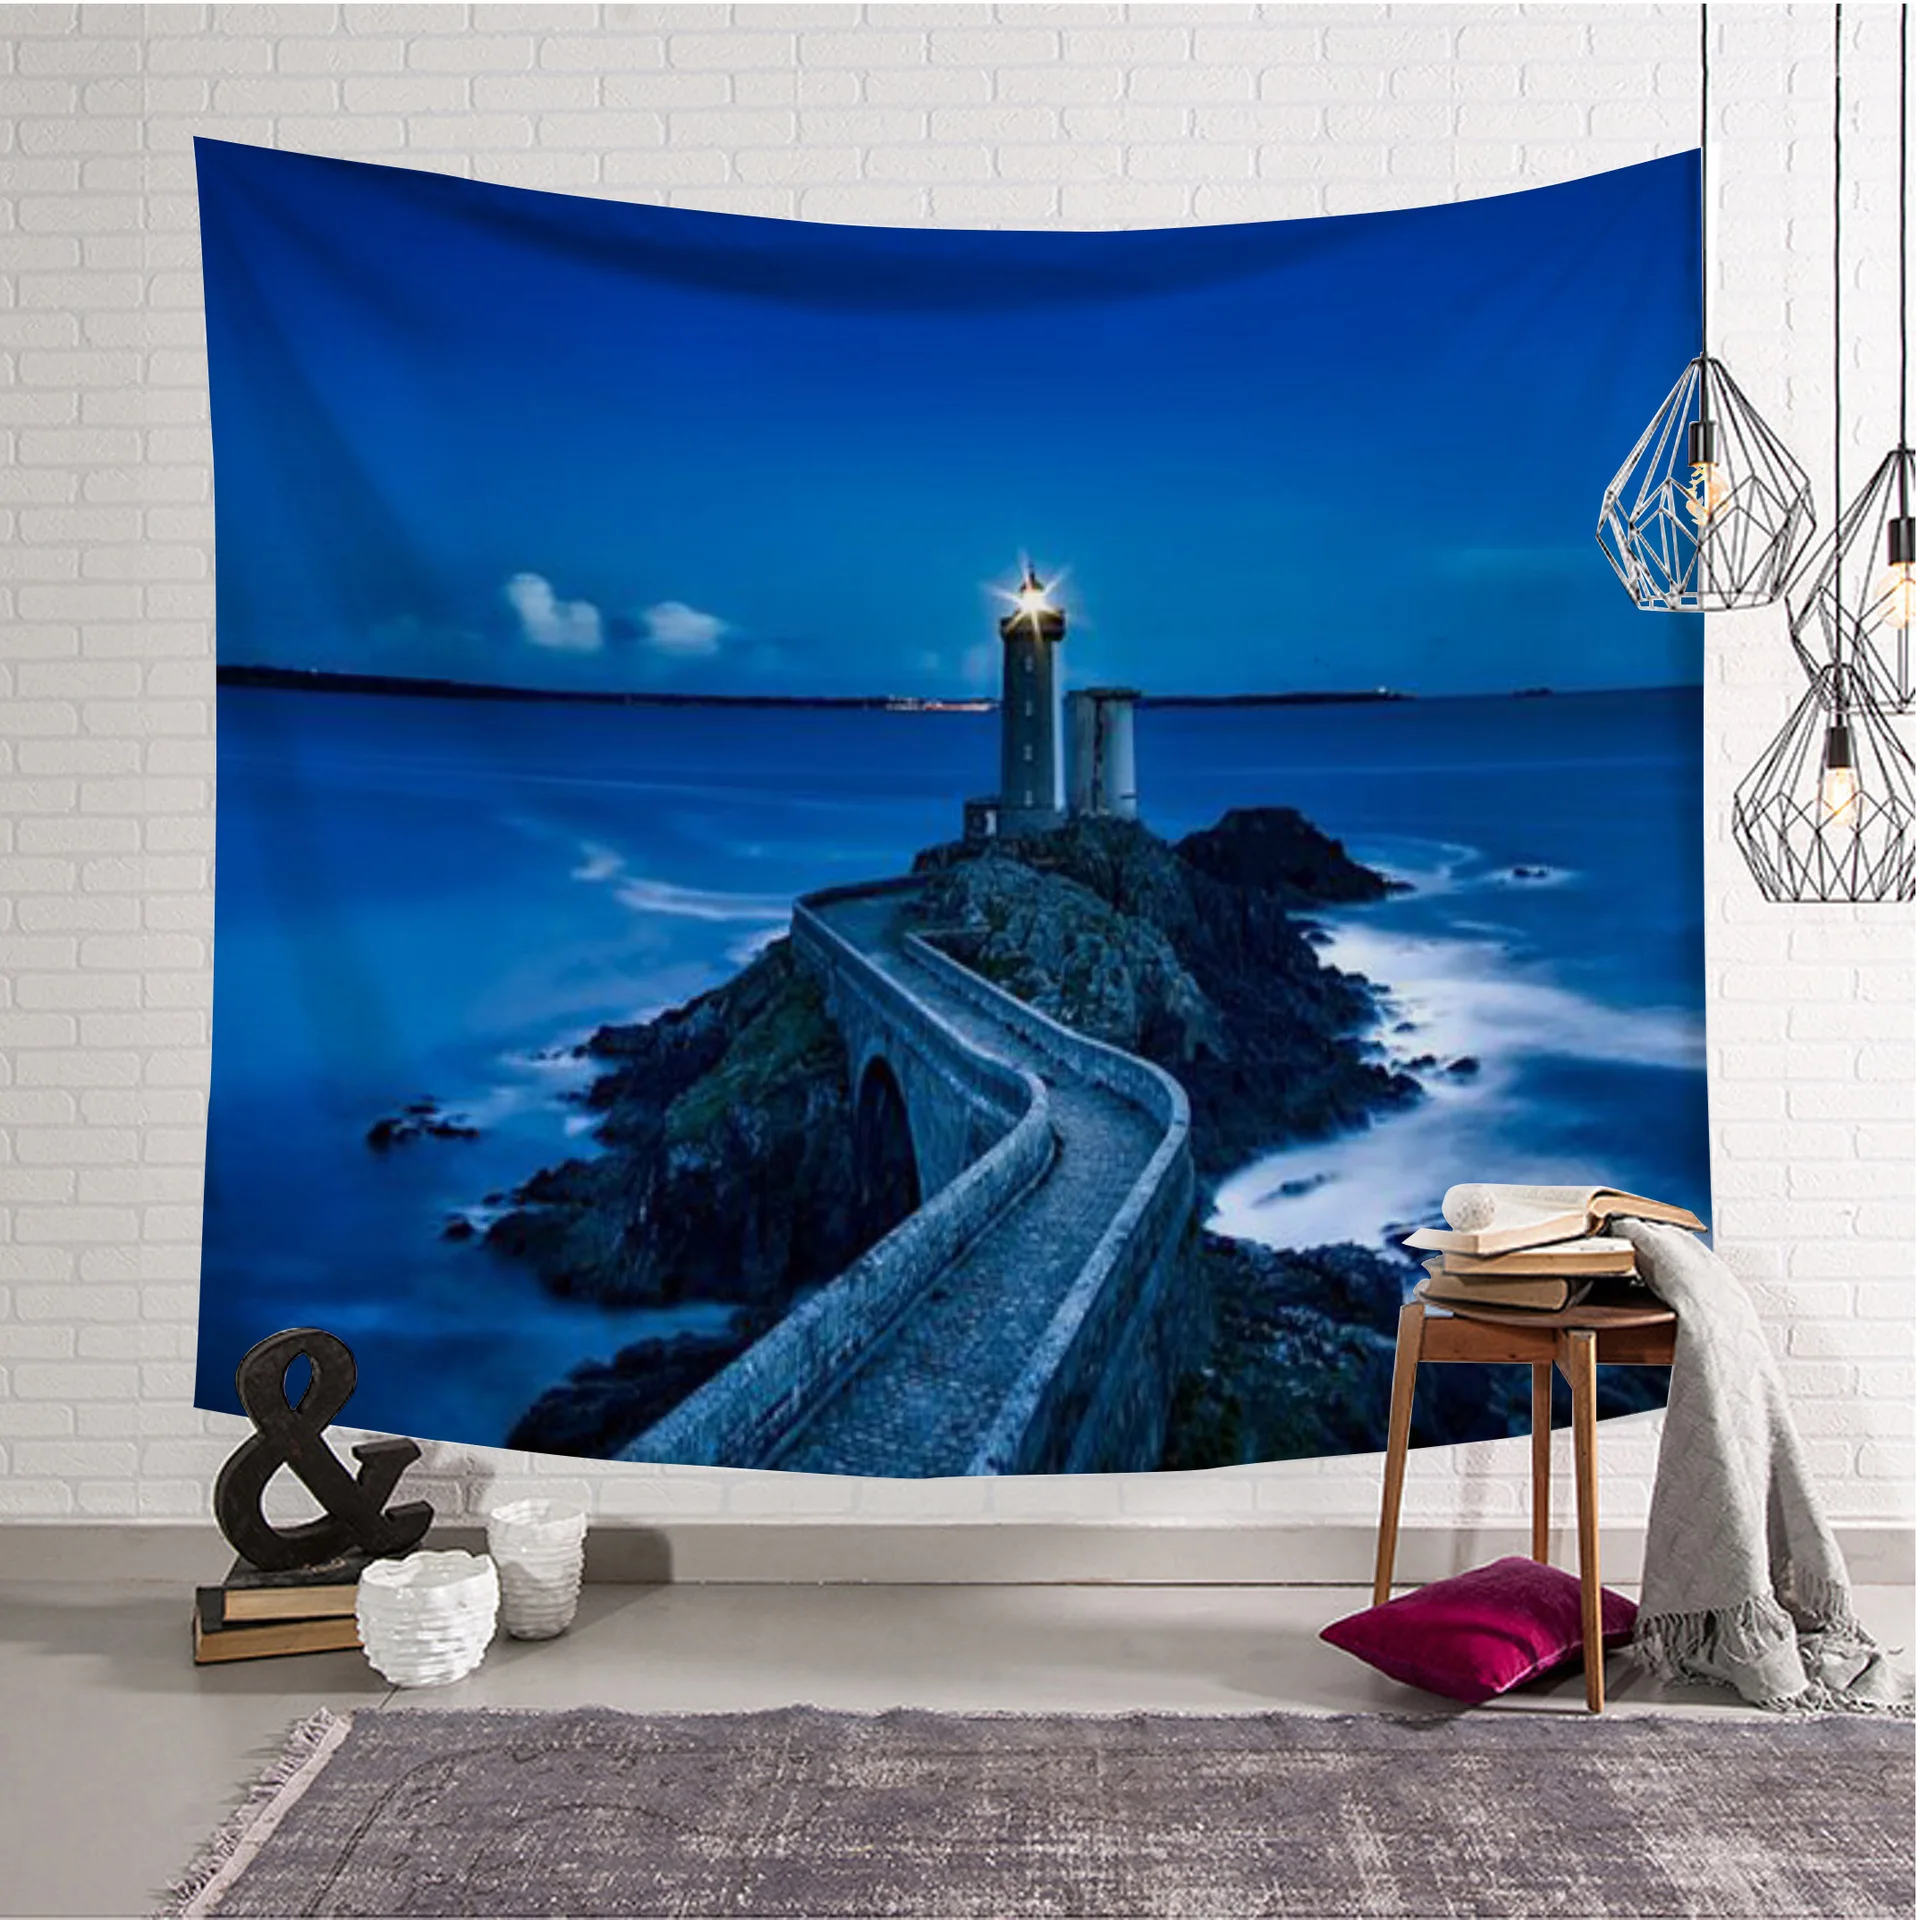 

Seaside Blue Star Lighthouse Tapestry Sunset Wall Hanging Room Sea Carpet Dorm Tapestries Art Home Decoration Accessories